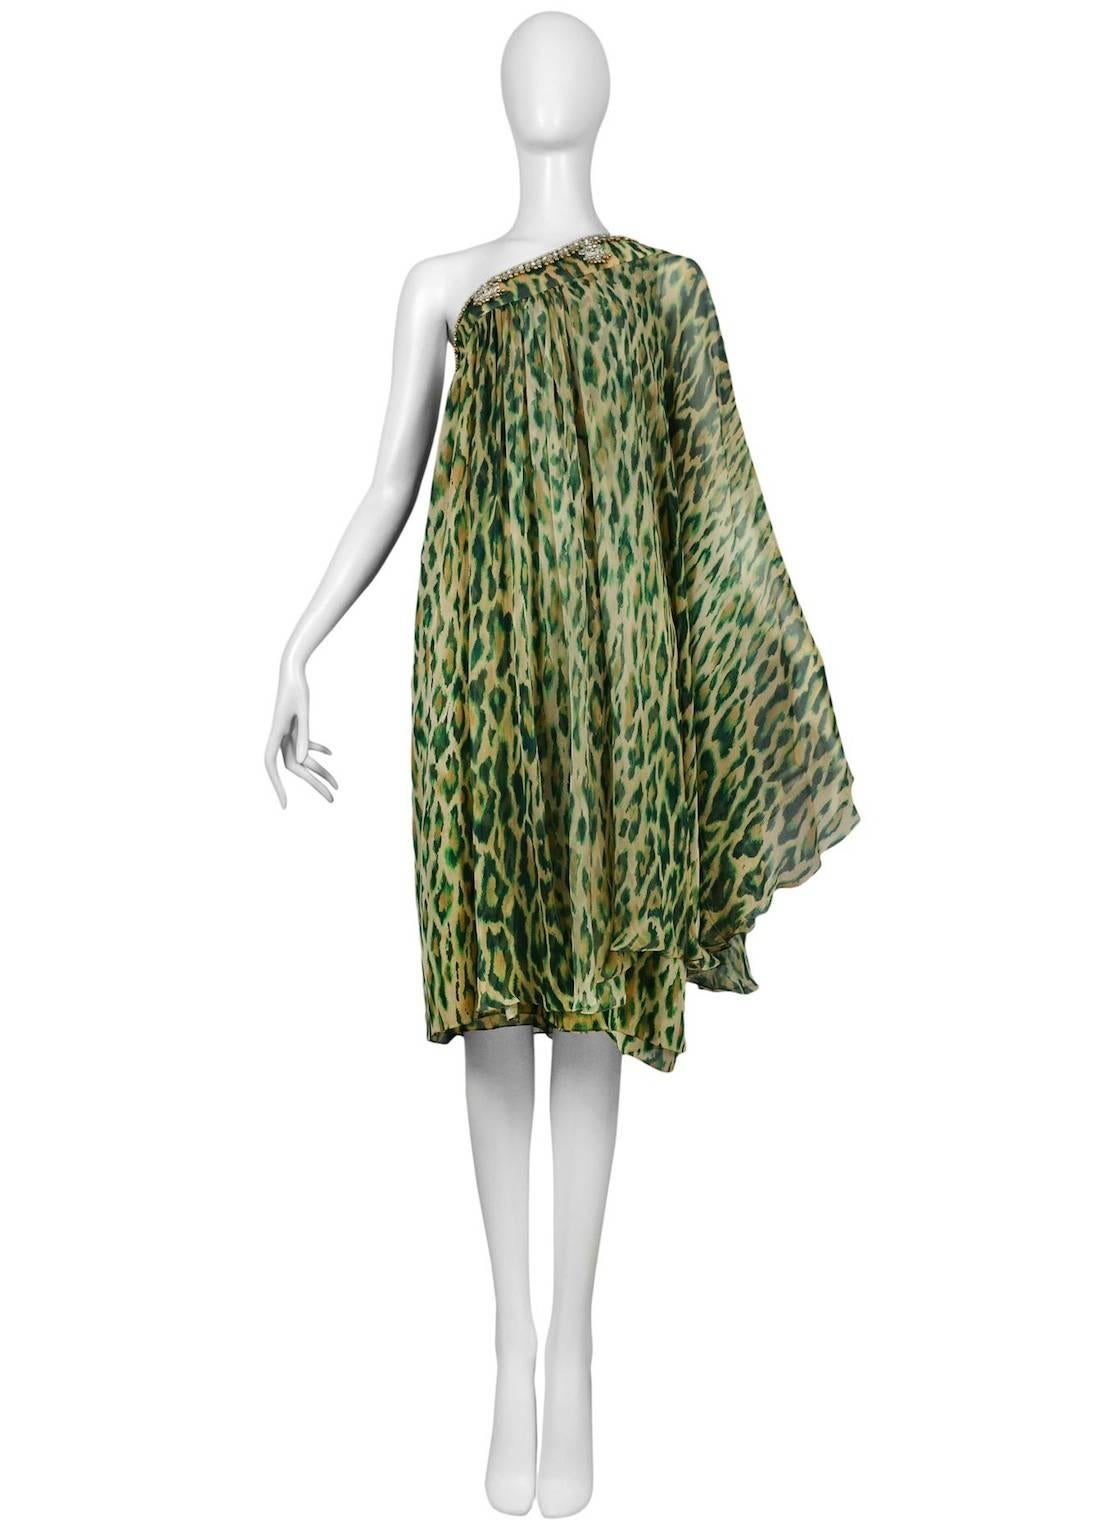 Vintage John Galliano for Christian Dior silk green leopard asymmetrical caftan with sequin and bell trim featuring a side covered button entrance. Runway piece from the Resort 2008 Collection.